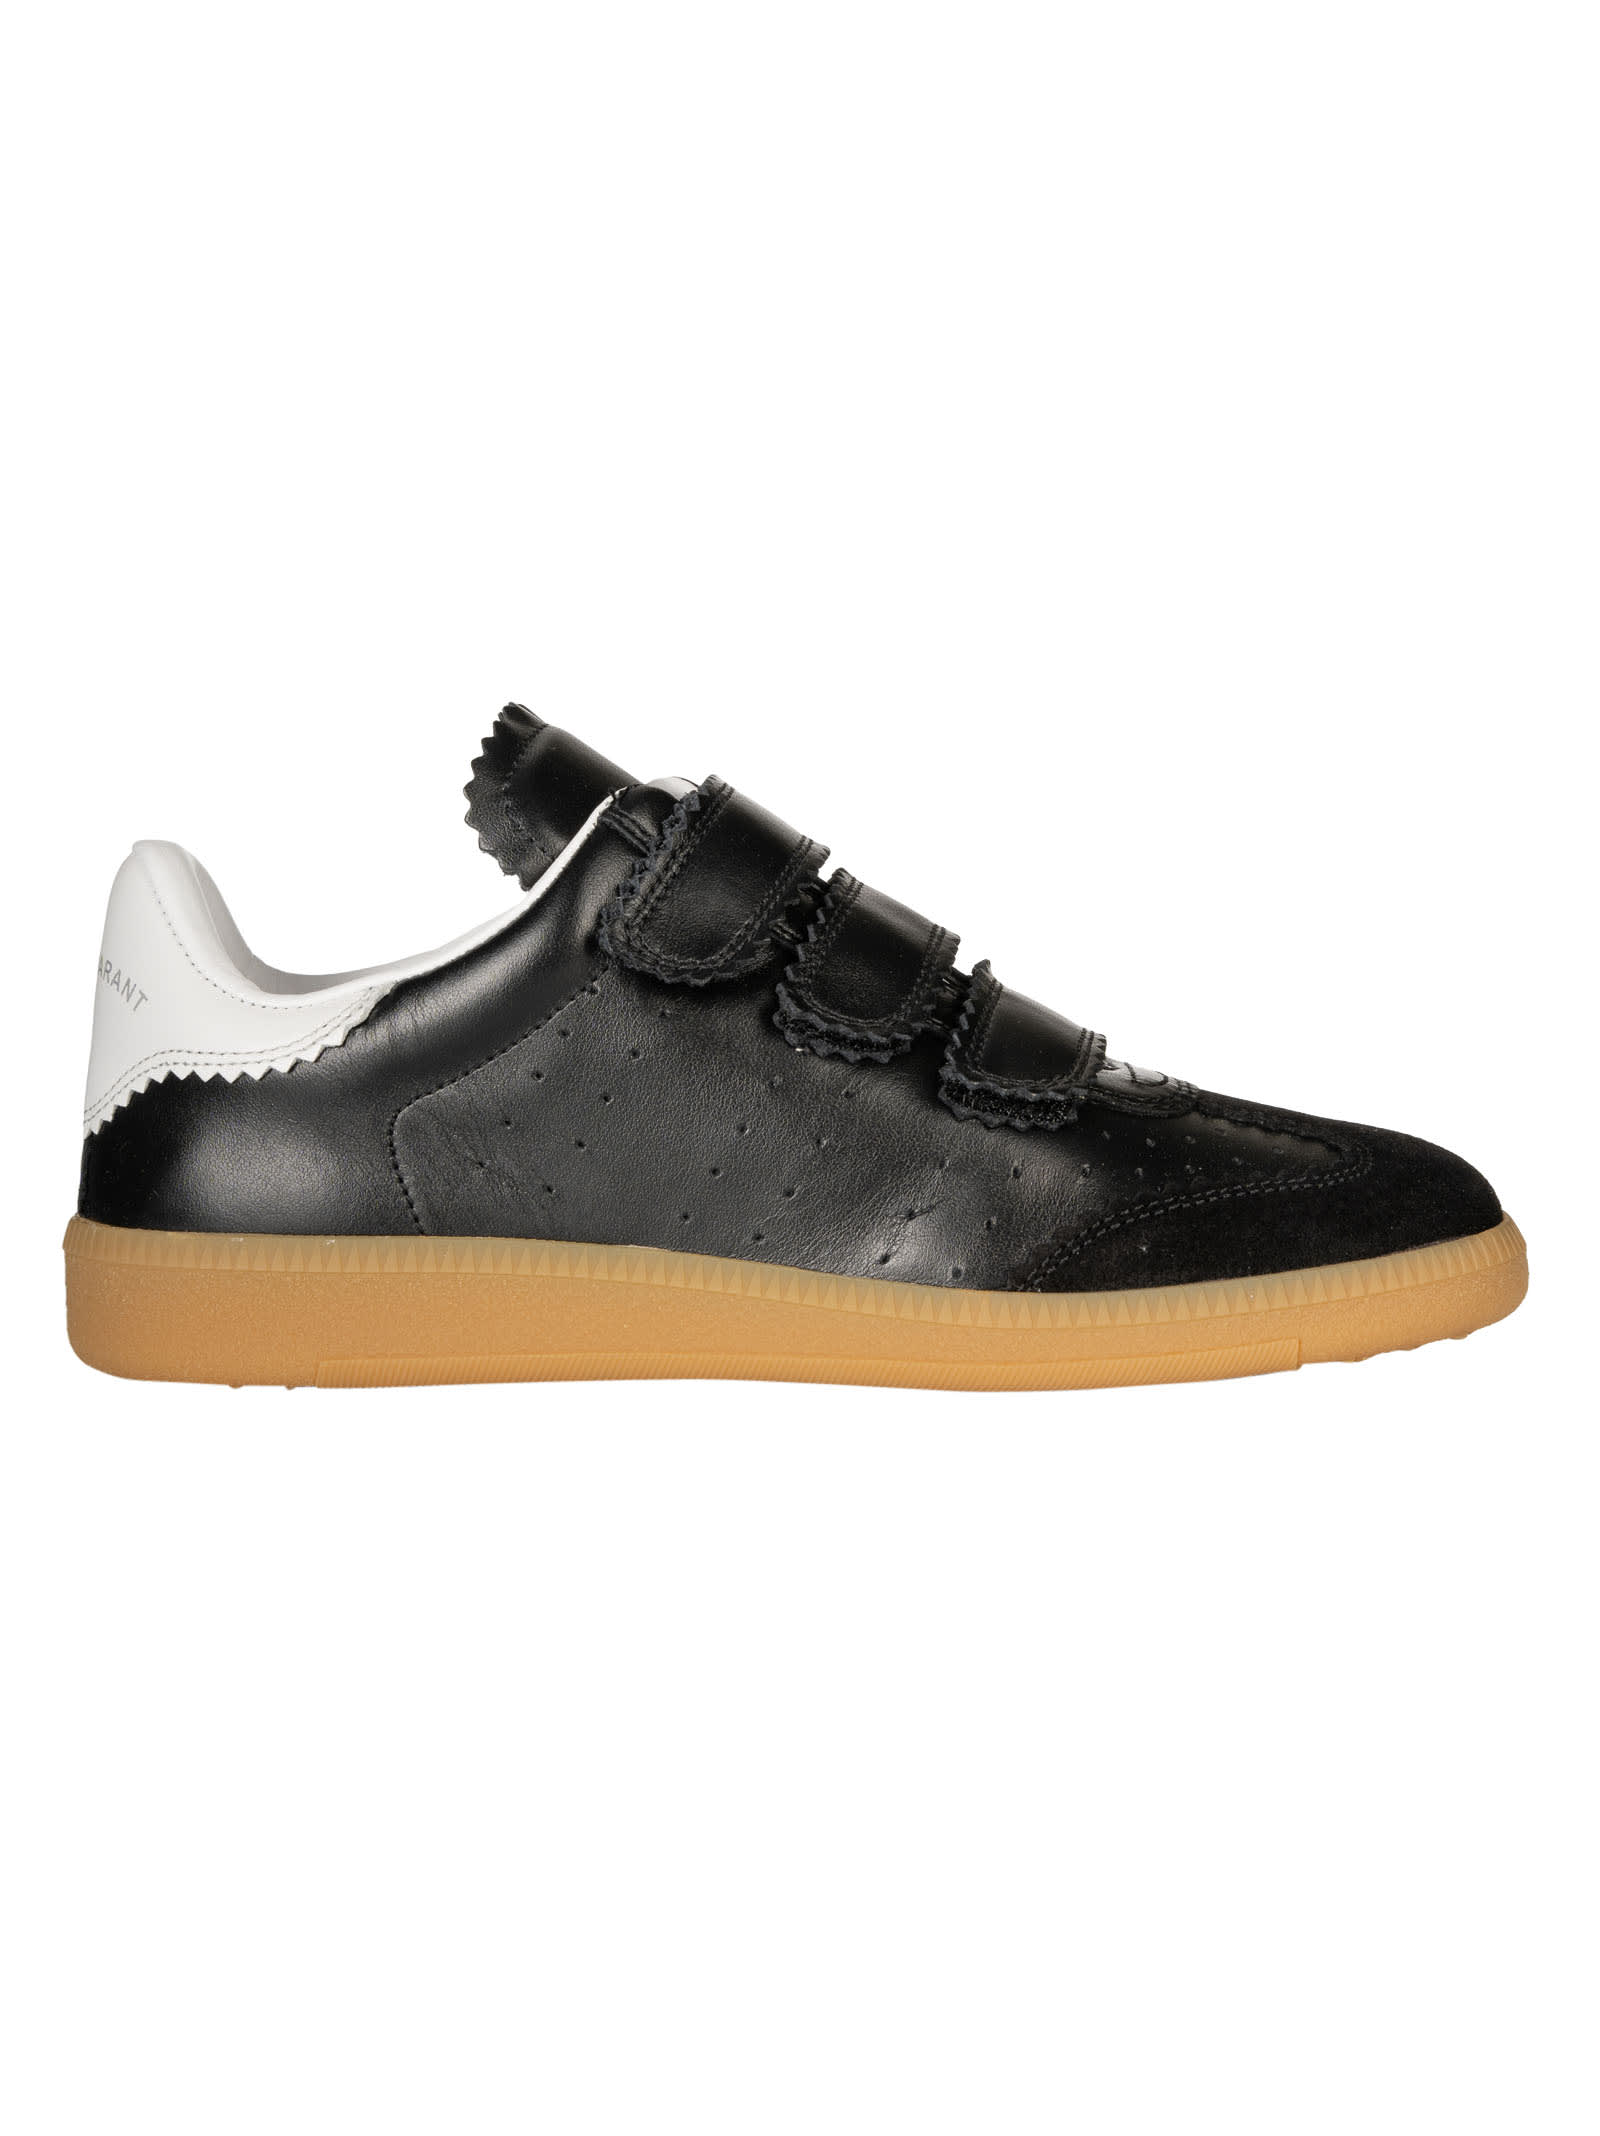 Buy Isabel Marant Tri Velcro Strap Sneakers online, shop Isabel Marant shoes with free shipping